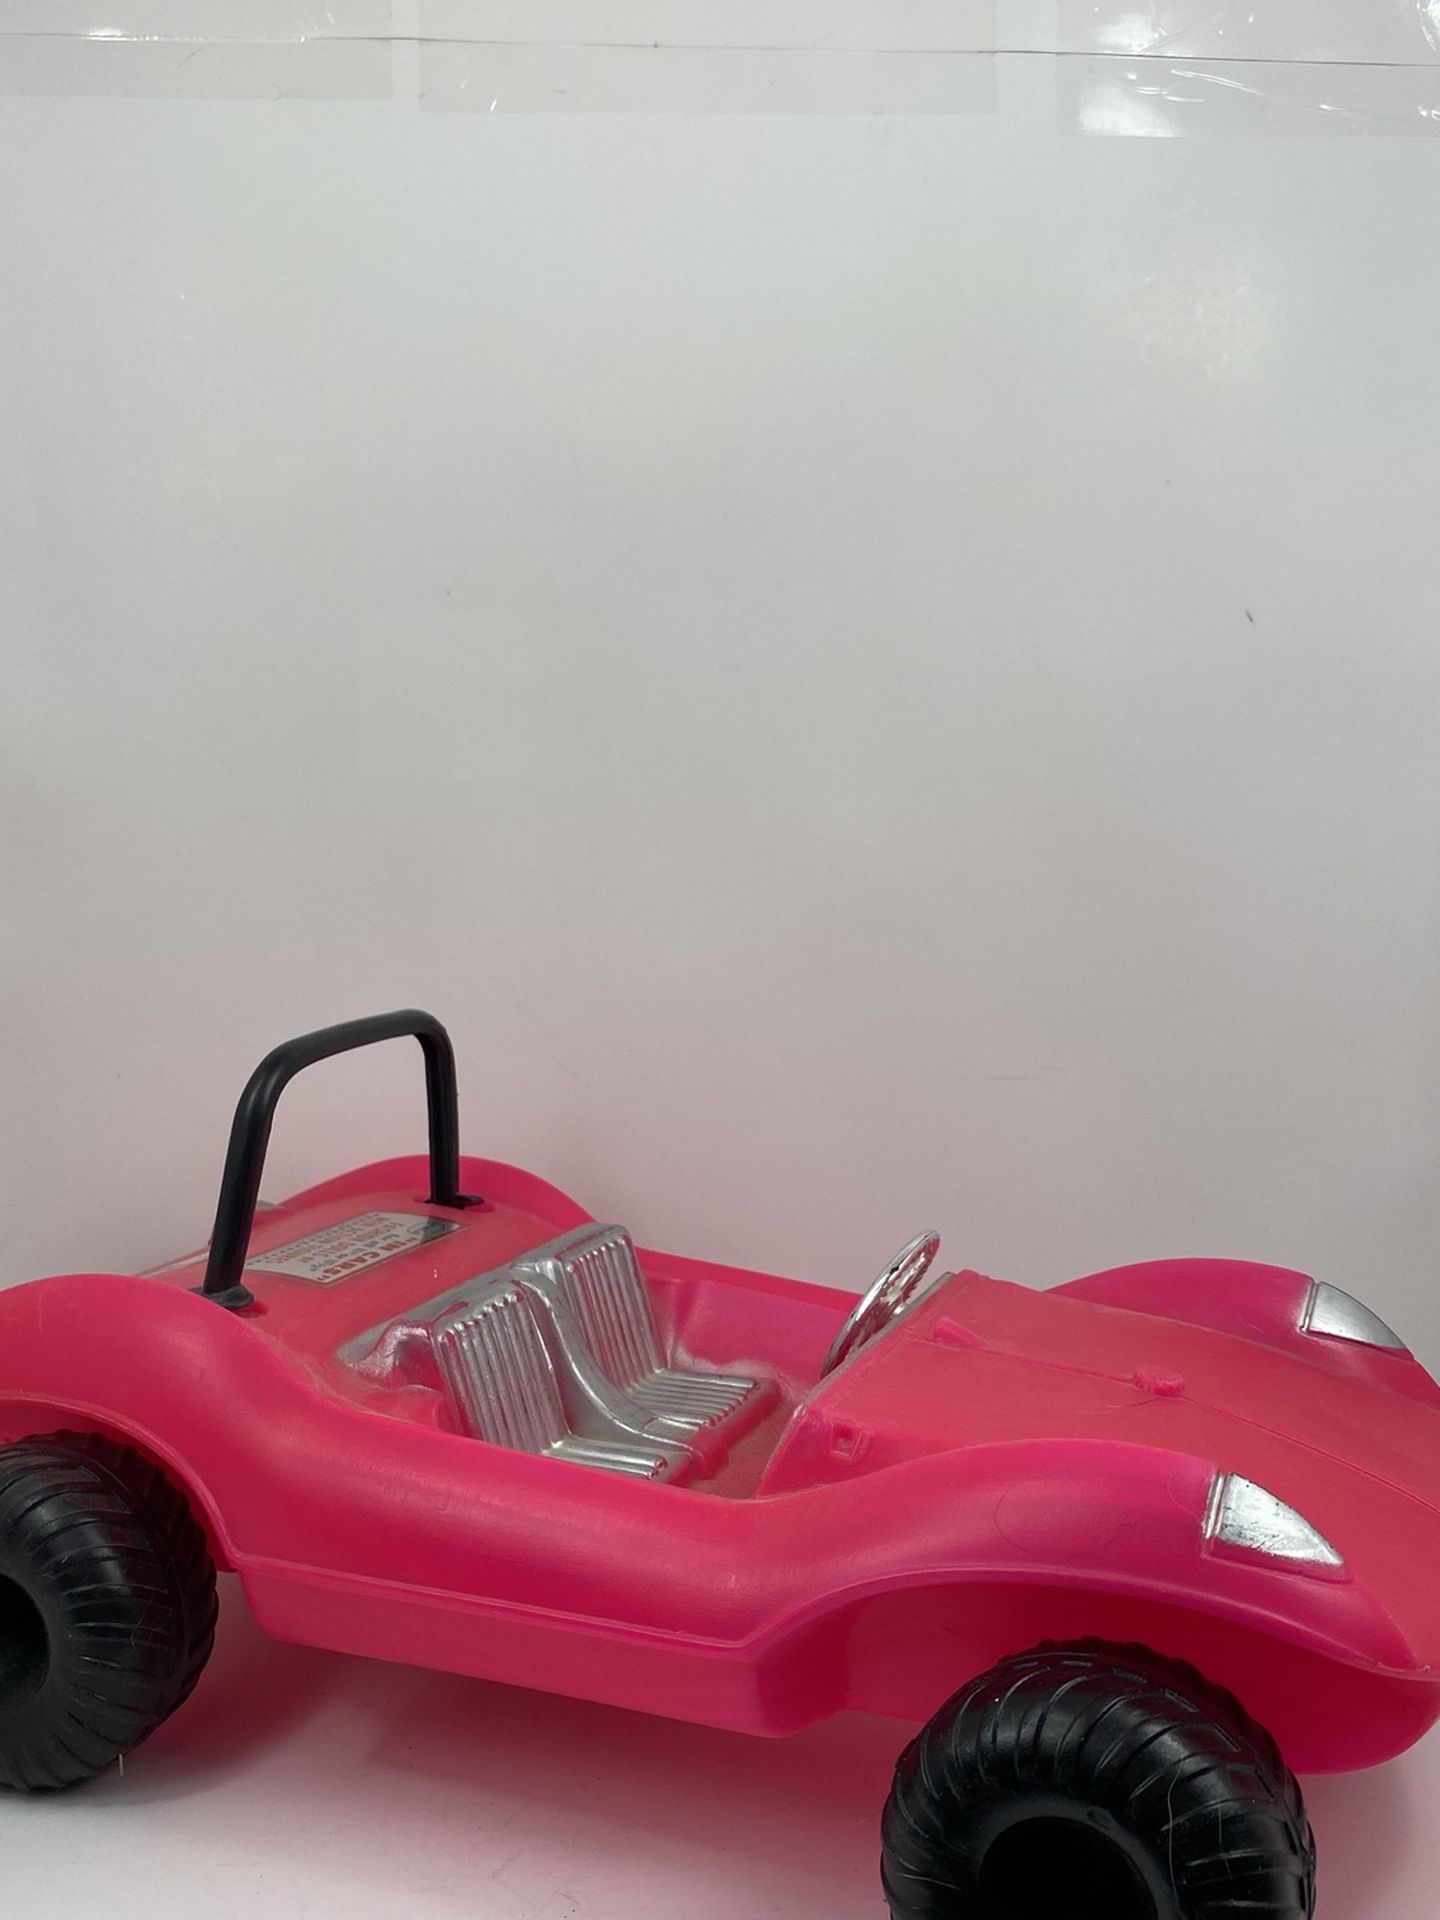 1970 “Rare” Barbie & Ken Pink Official Dune Buggy by Irwin As is